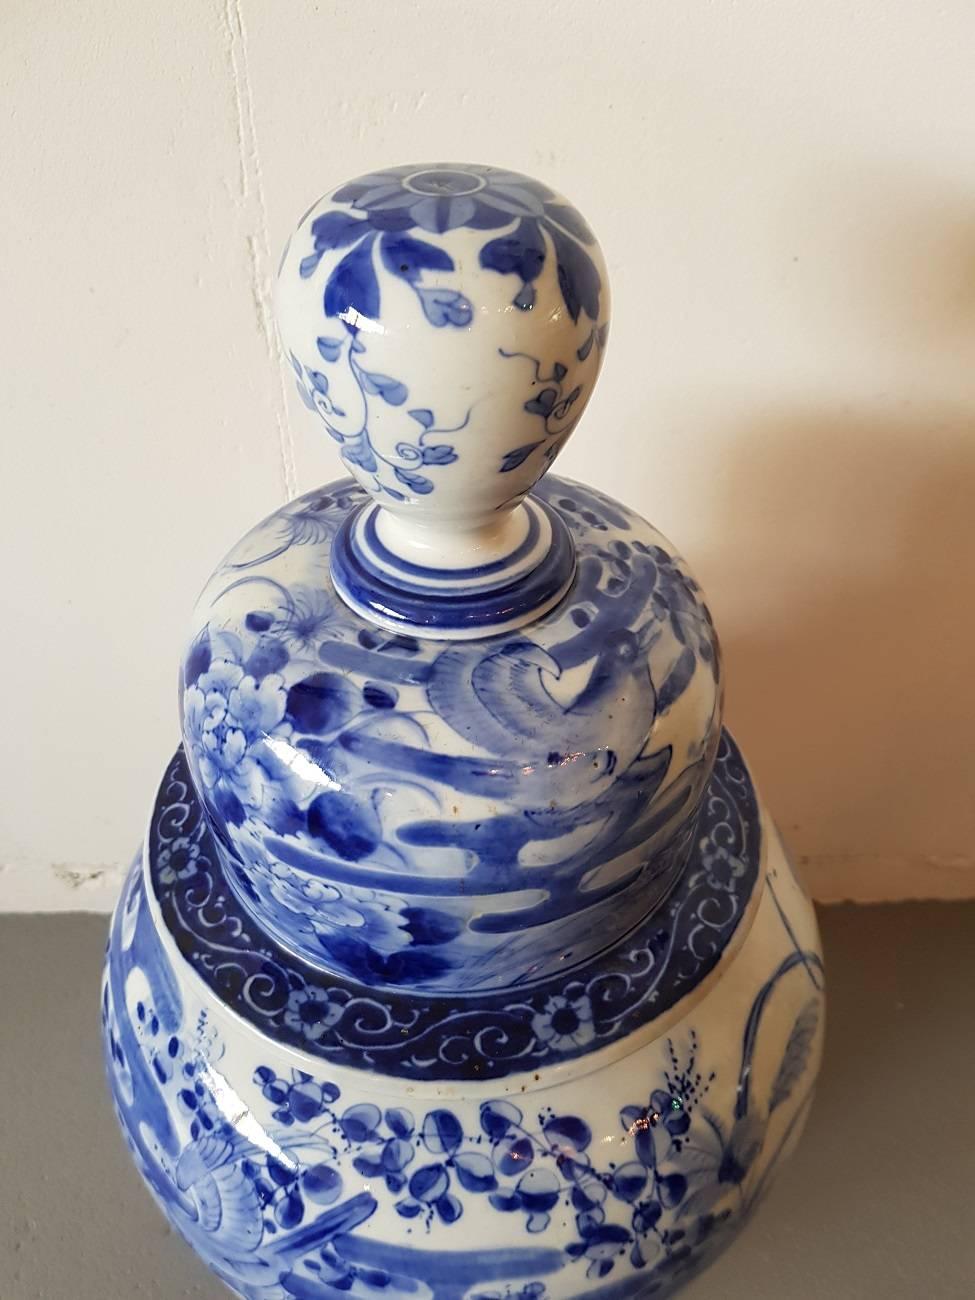 Late 19th-early 20th century Japanese Arita porcelain jar with lid and blue underglaze painting with presentation of flowers and birds (in mint condition only the bottom has a few hairlines).

The measurements are:
Depth 26 cm/ 10.2 inch.
Width